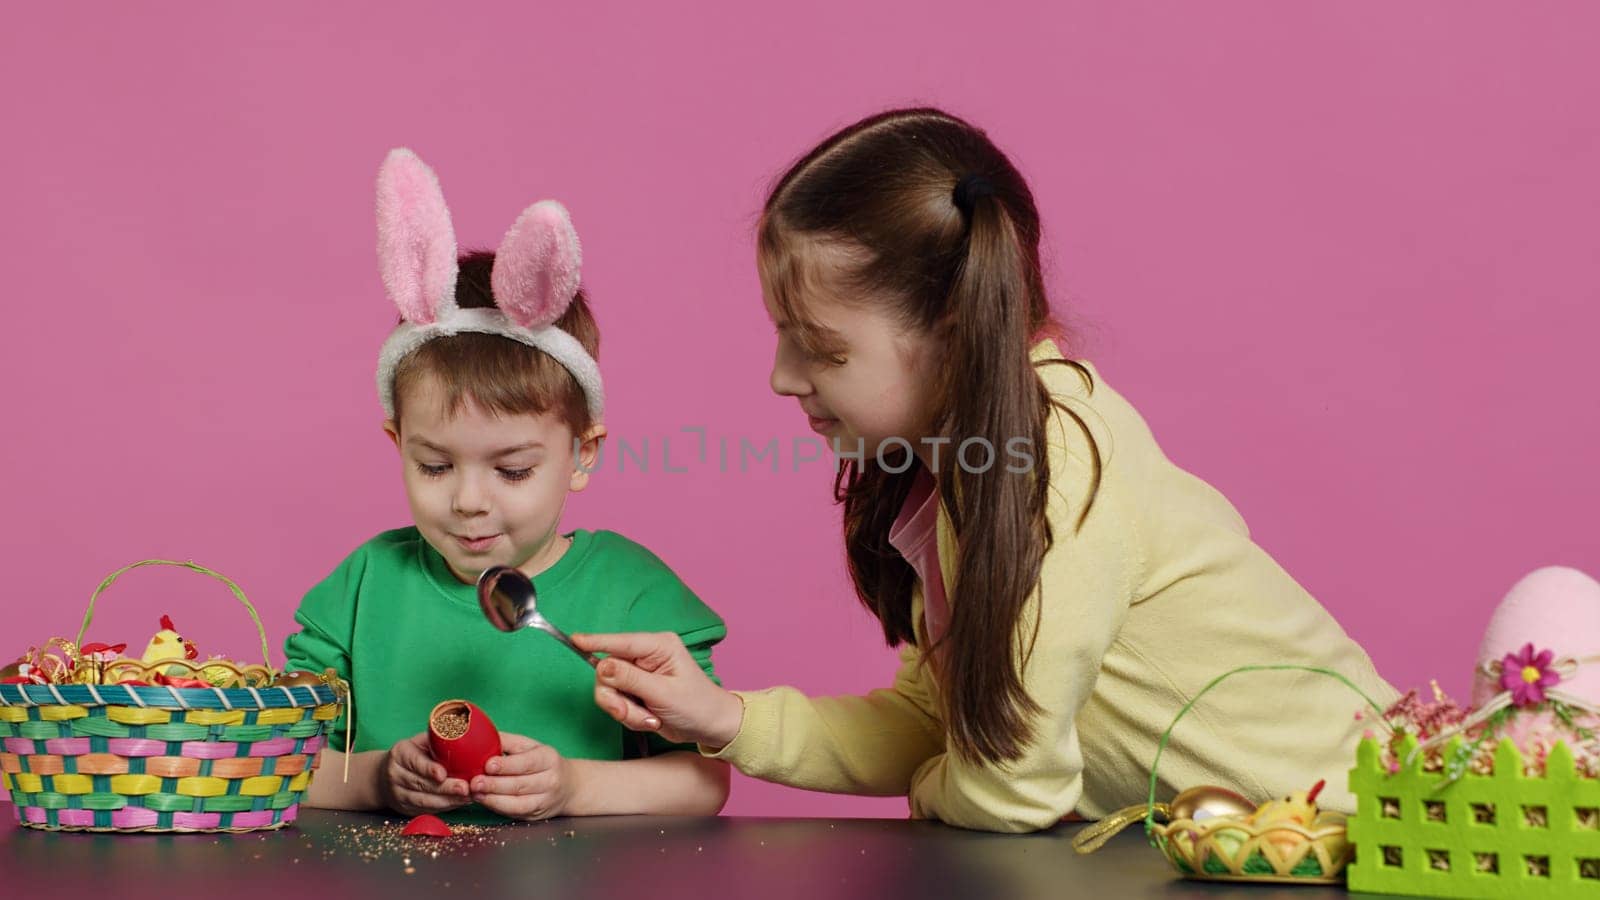 Ecstatic kids breaking a special easter egg to find a surprise inside by DCStudio